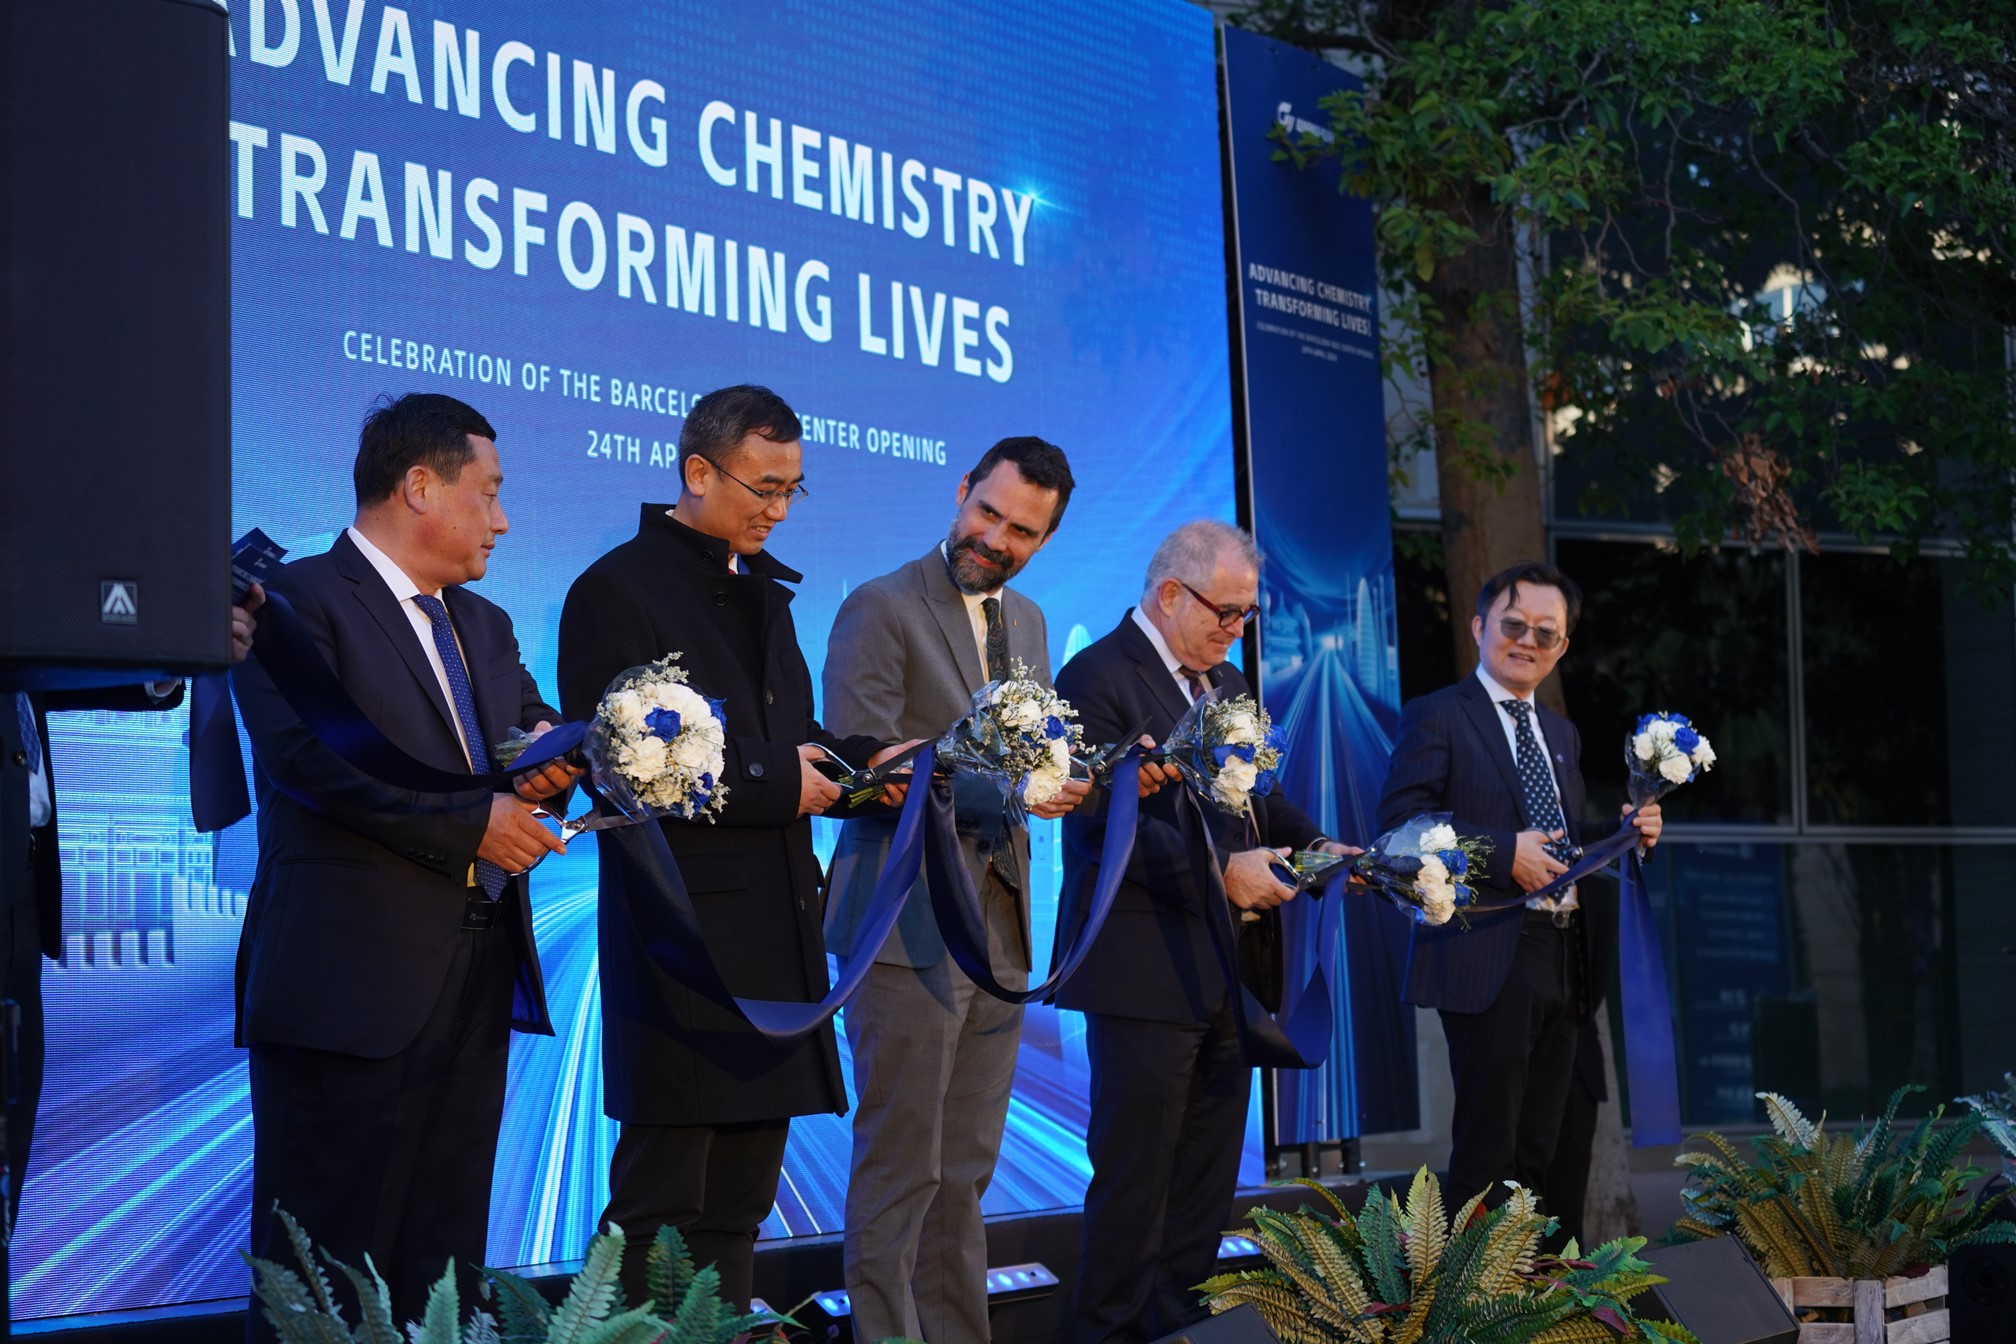 Opening ceremony of Wanhua’s Barcelona R&D center.